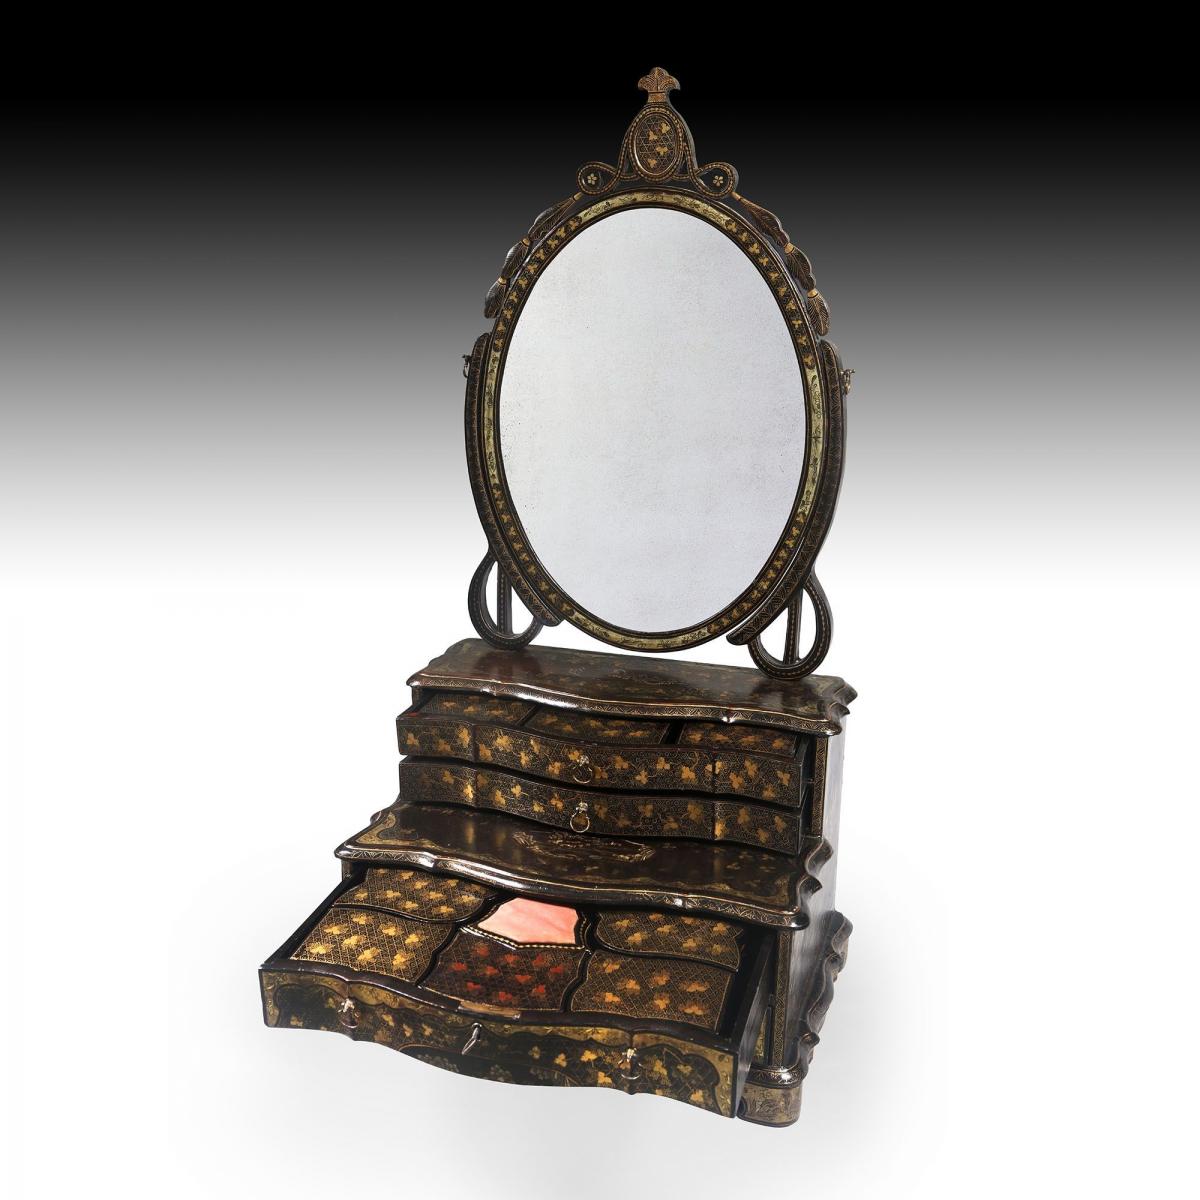 An early 19th century Chinese lacquer dressing mirror